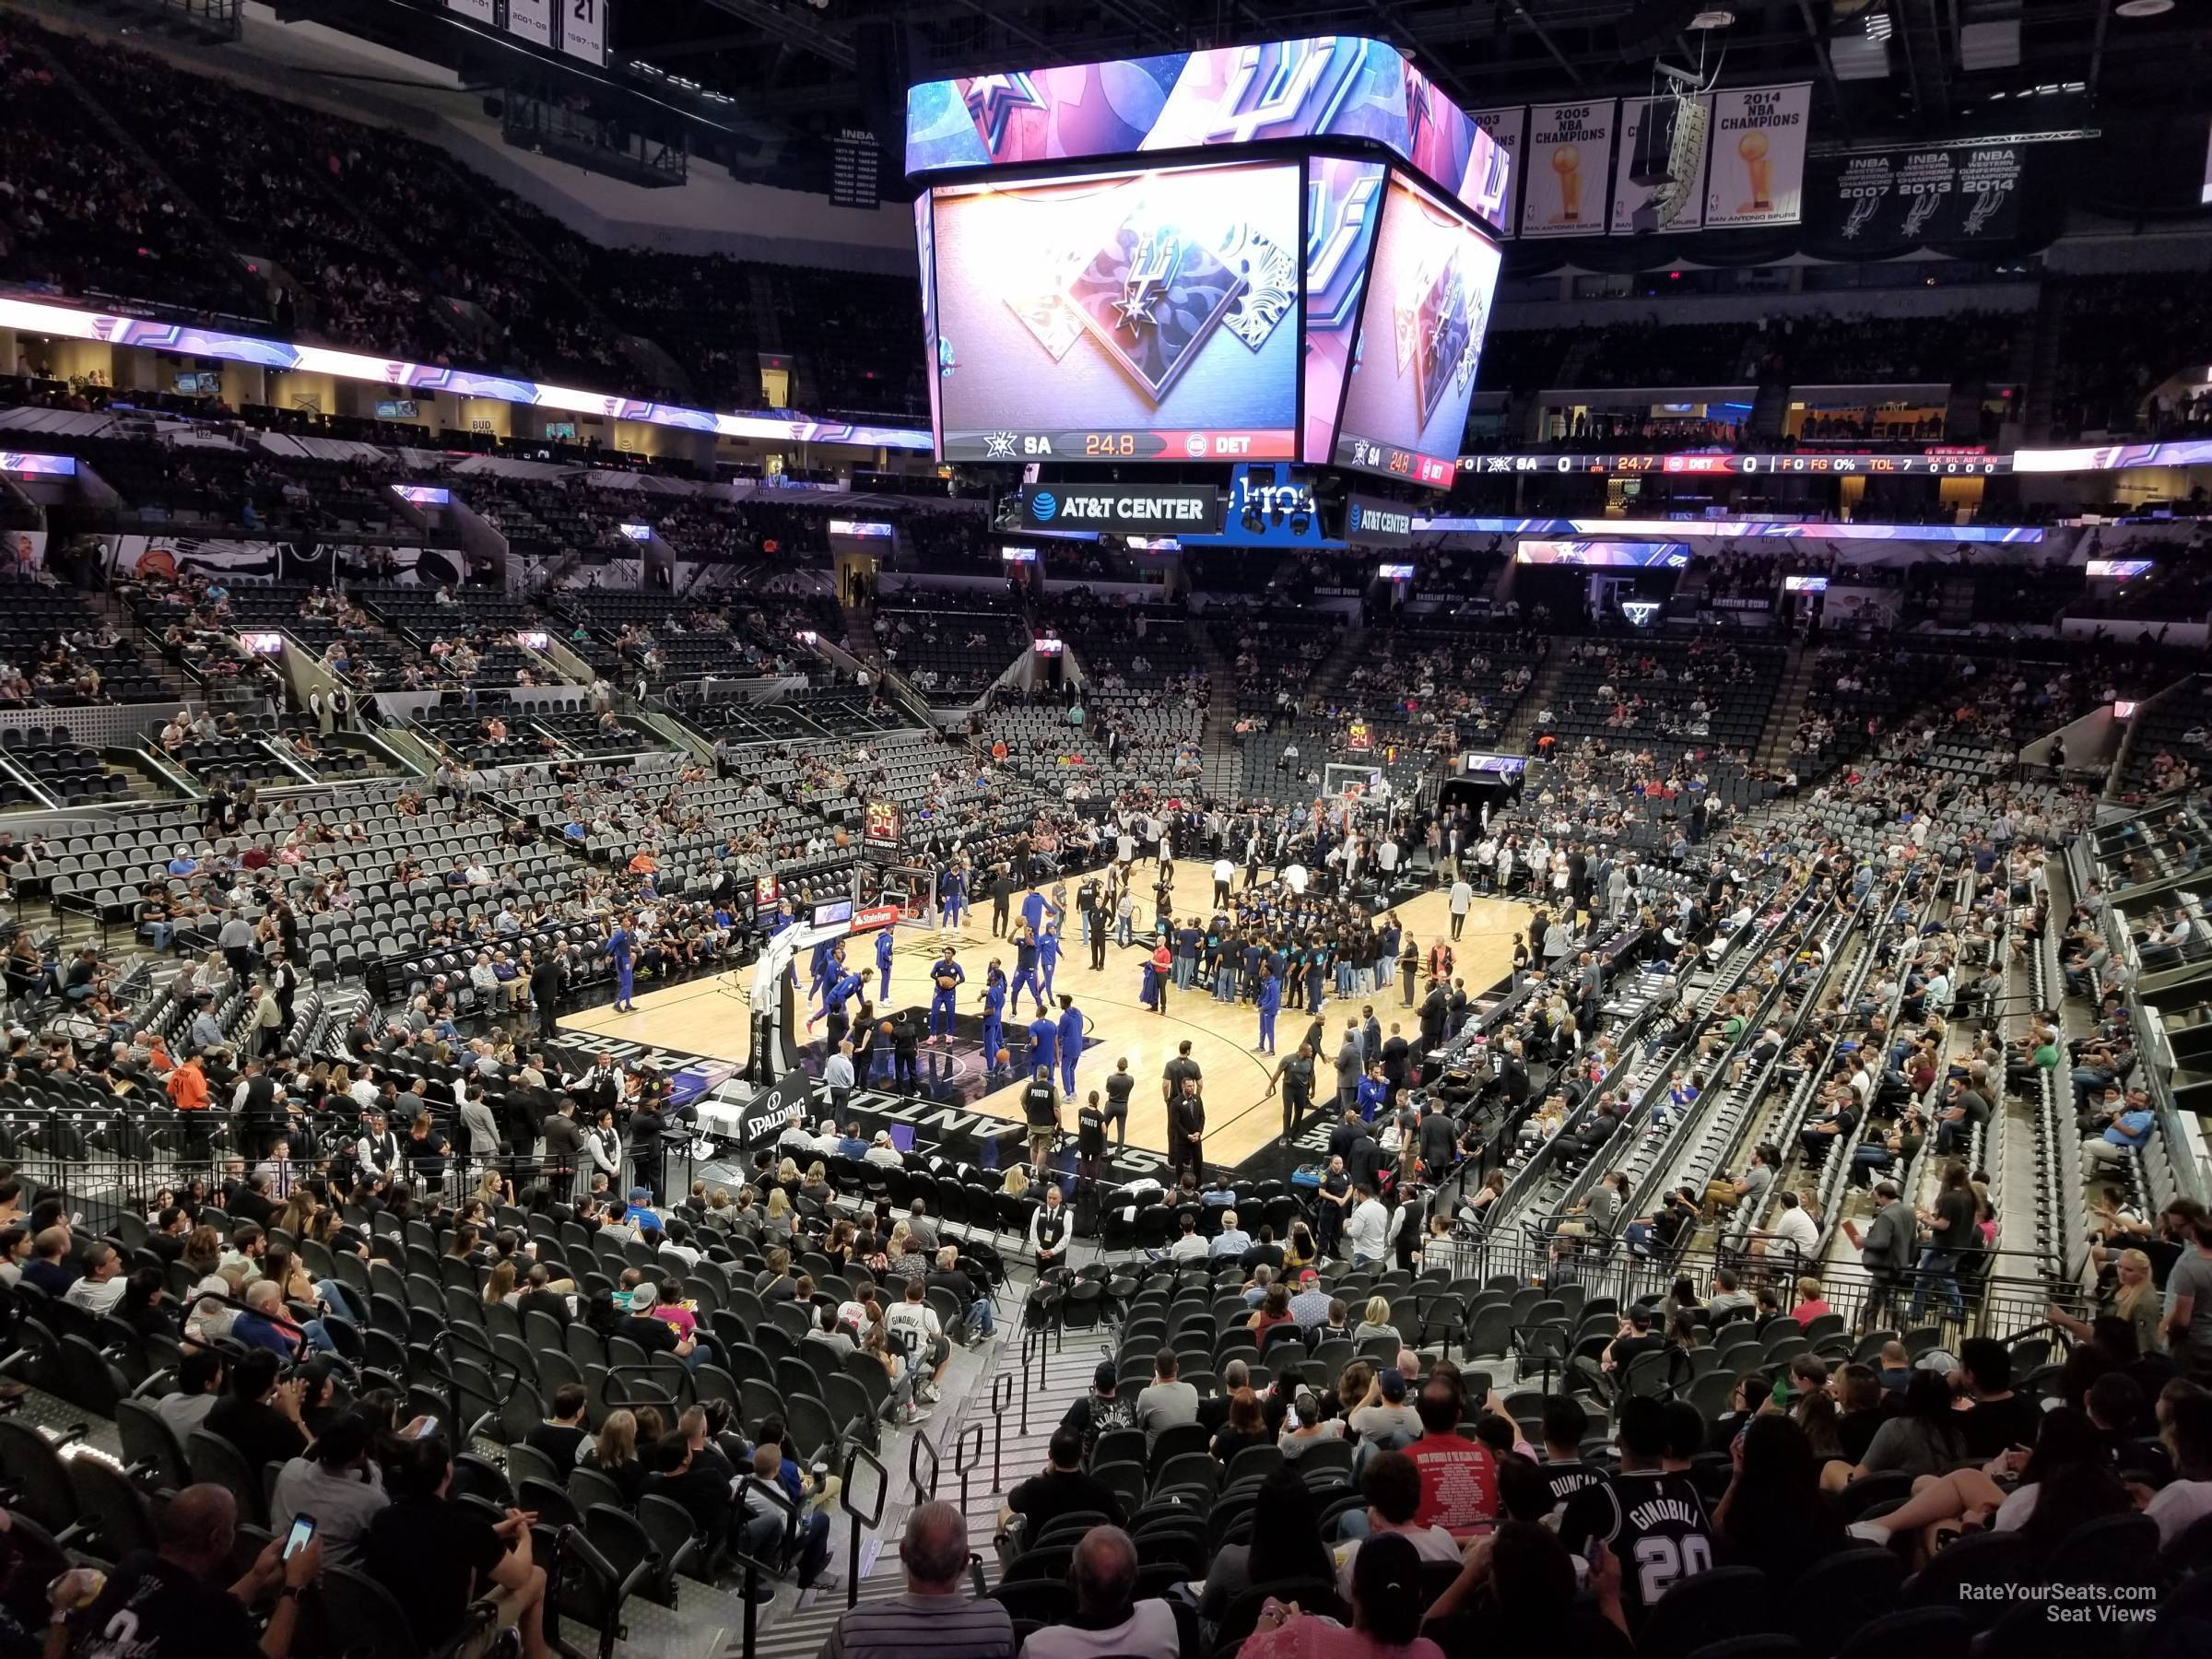 section 113, row 27 seat view  for basketball - at&t center